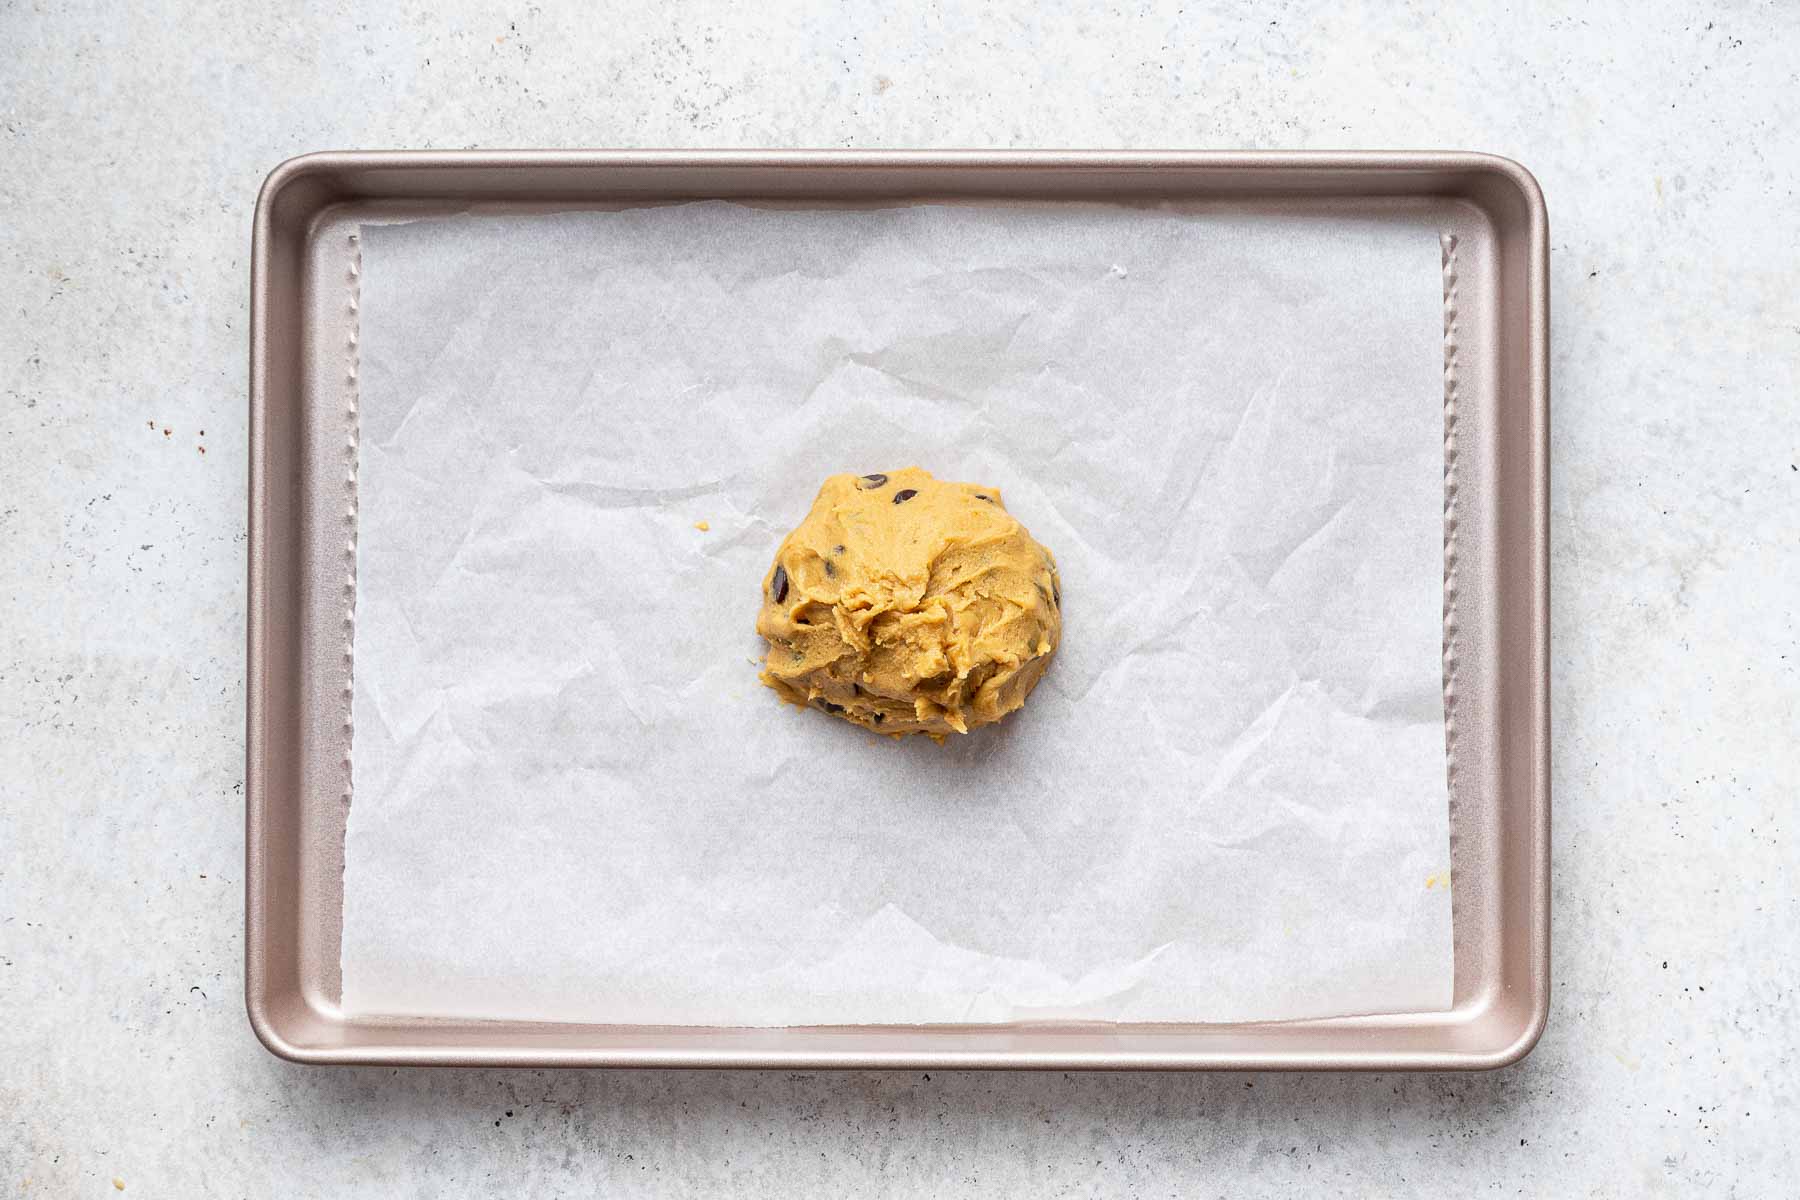 One single mound of raw cookie dough on small baking sheet lined with parchment paper.